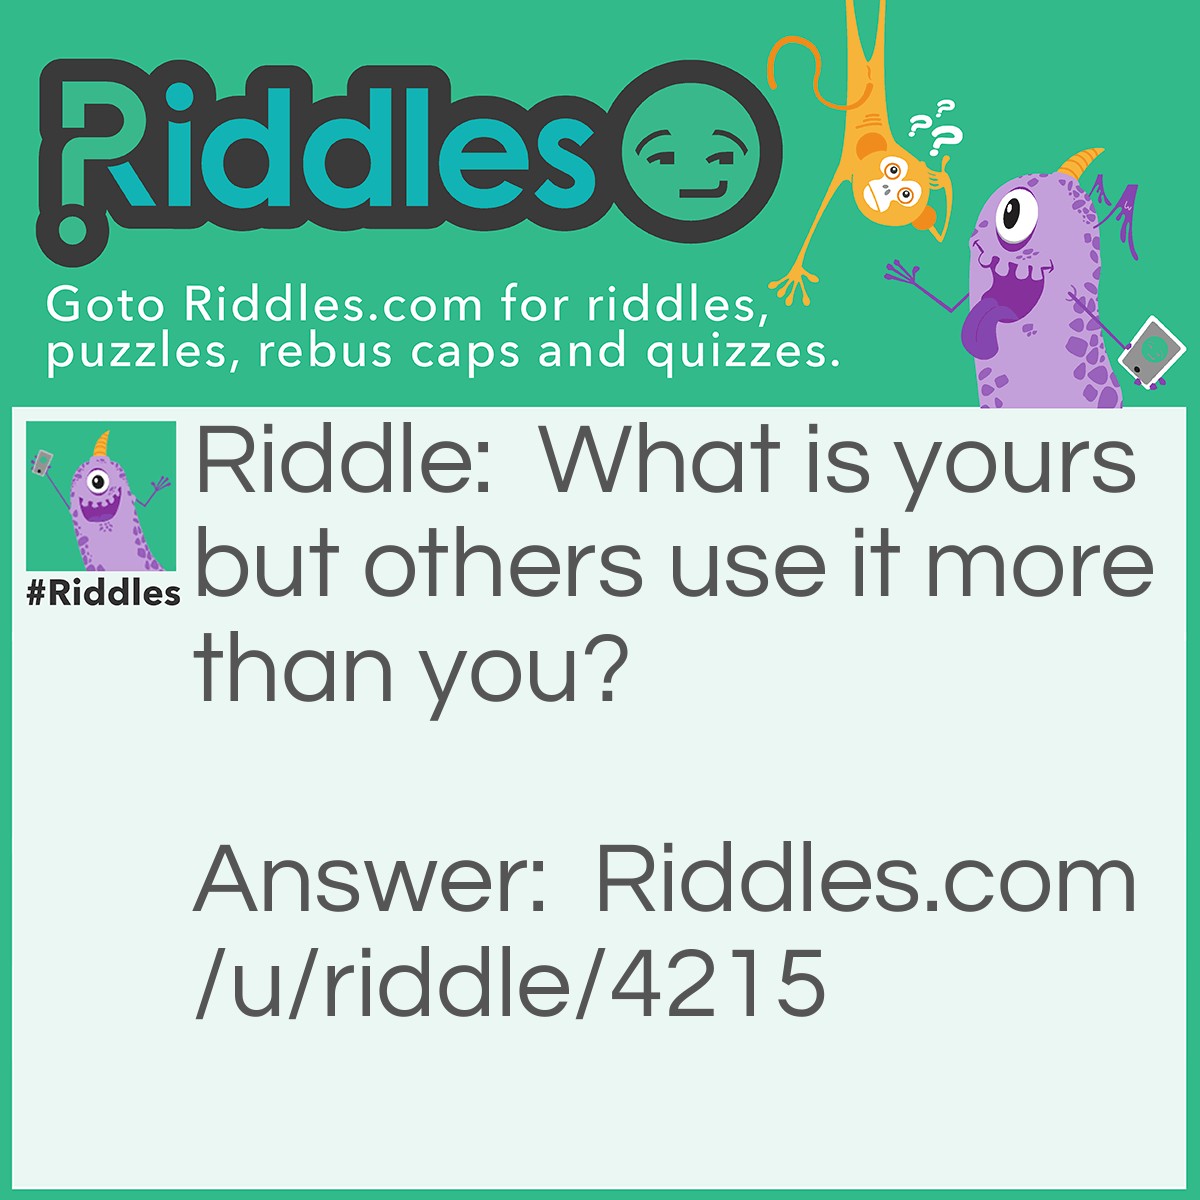 Riddle: What is yours but others use it more than you? Answer: Your name!